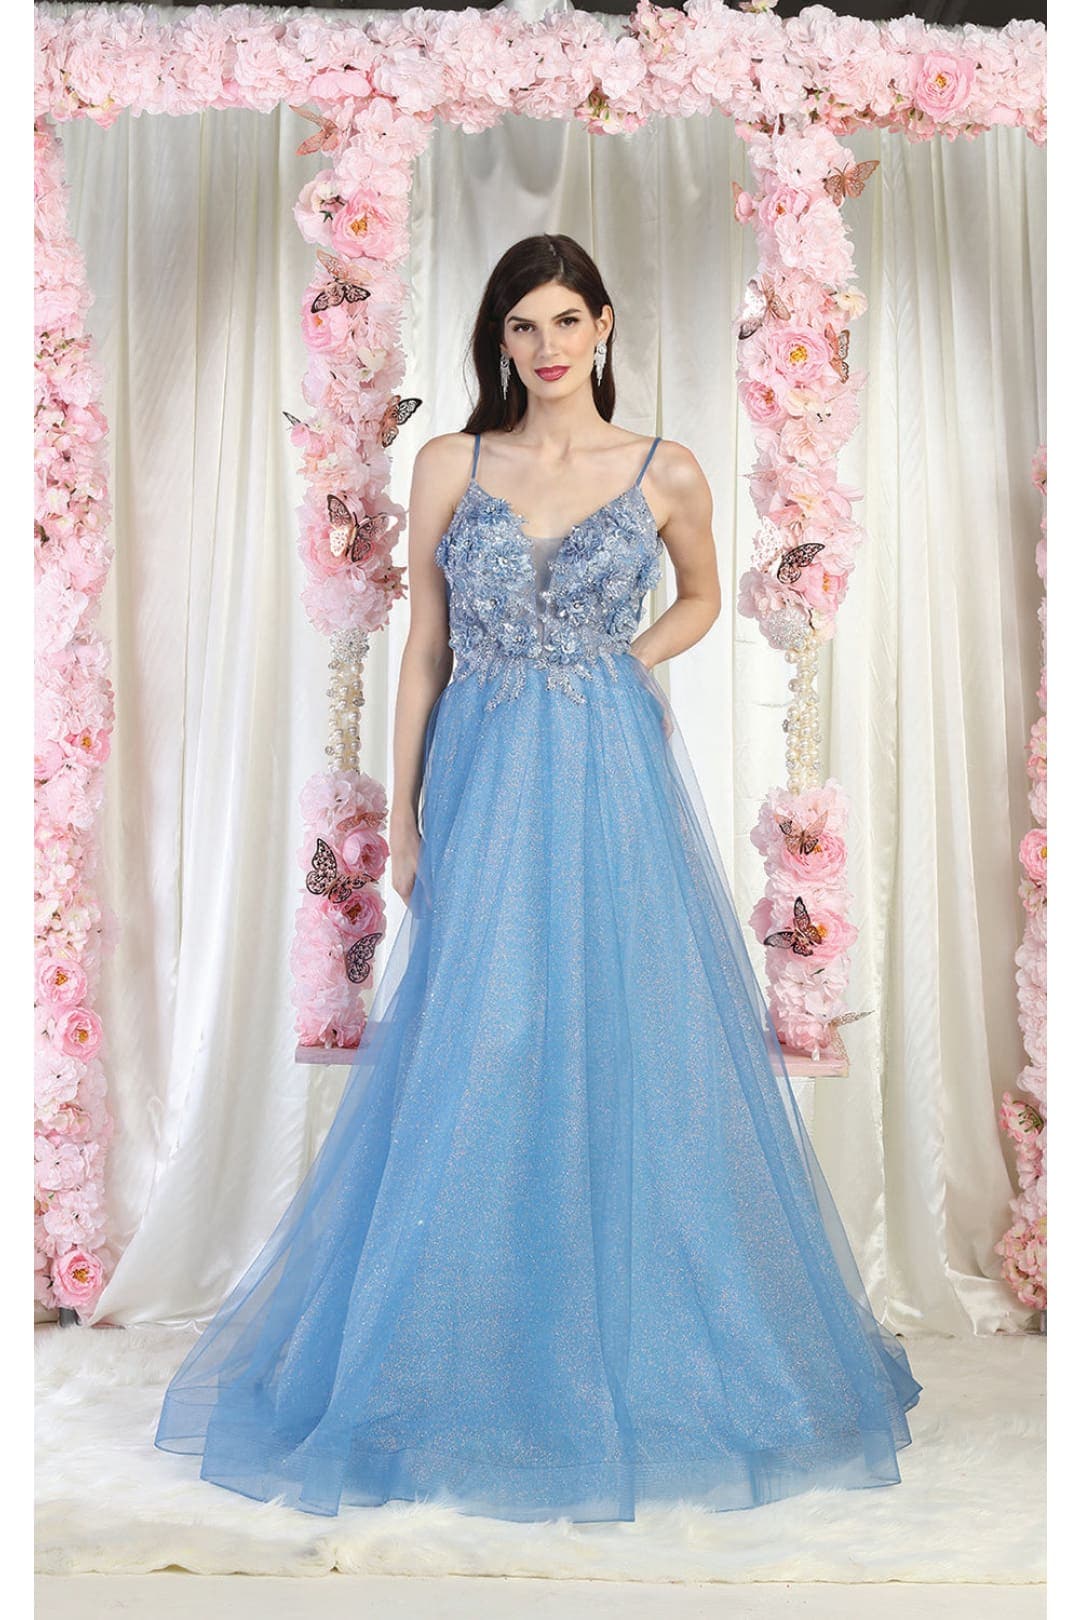 Royal Queen RQ8024 Spaghetti Straps Pageant Gown - Dress